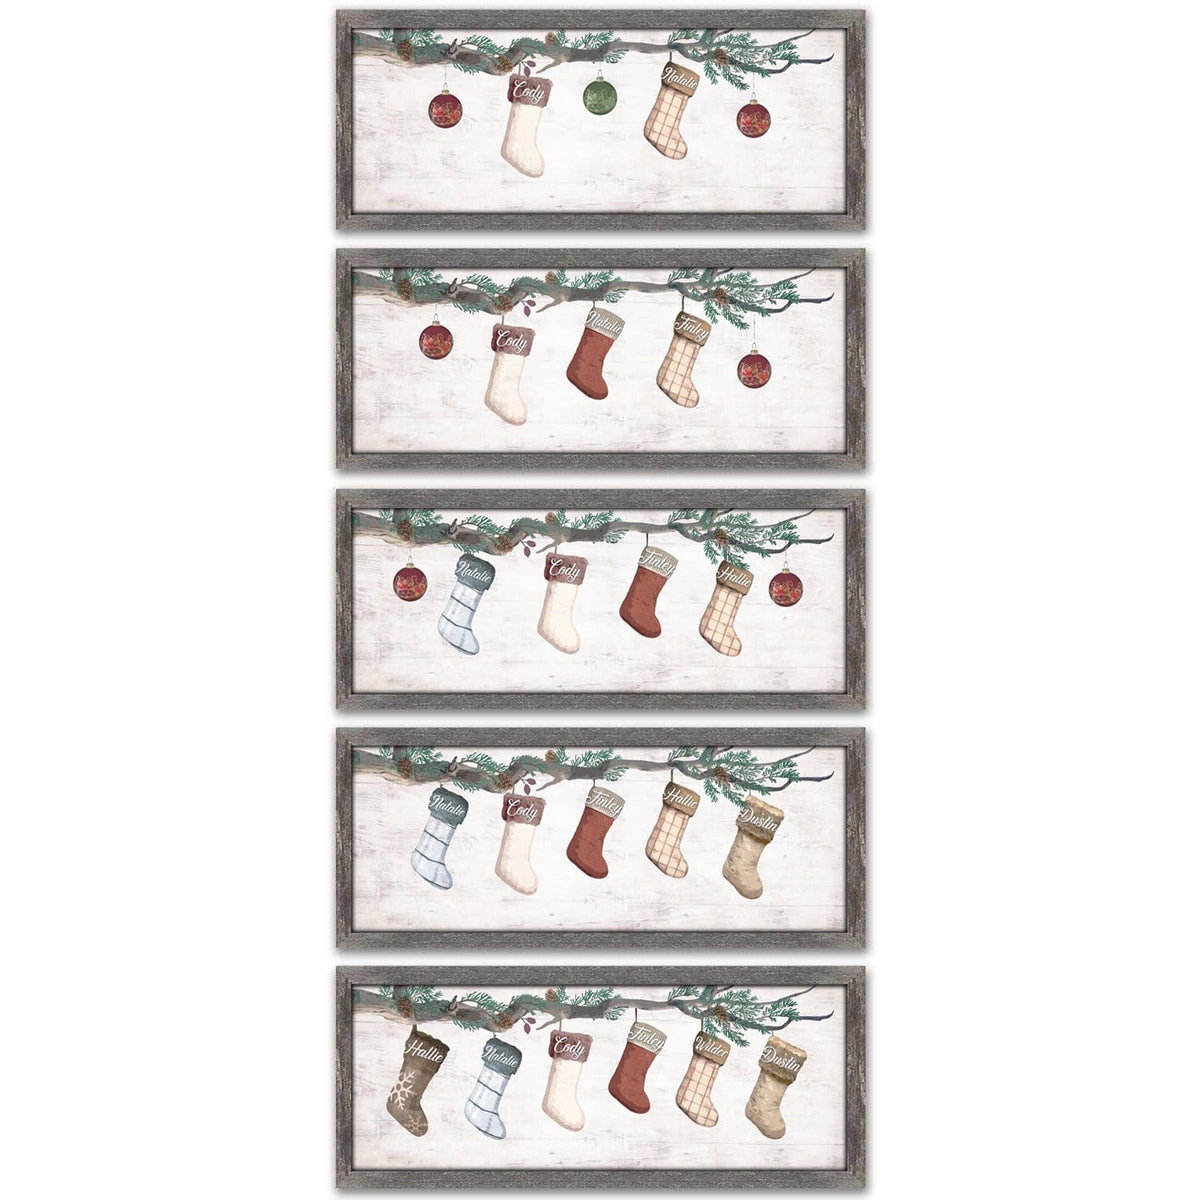 2-6 stockings shown as a framed canvas